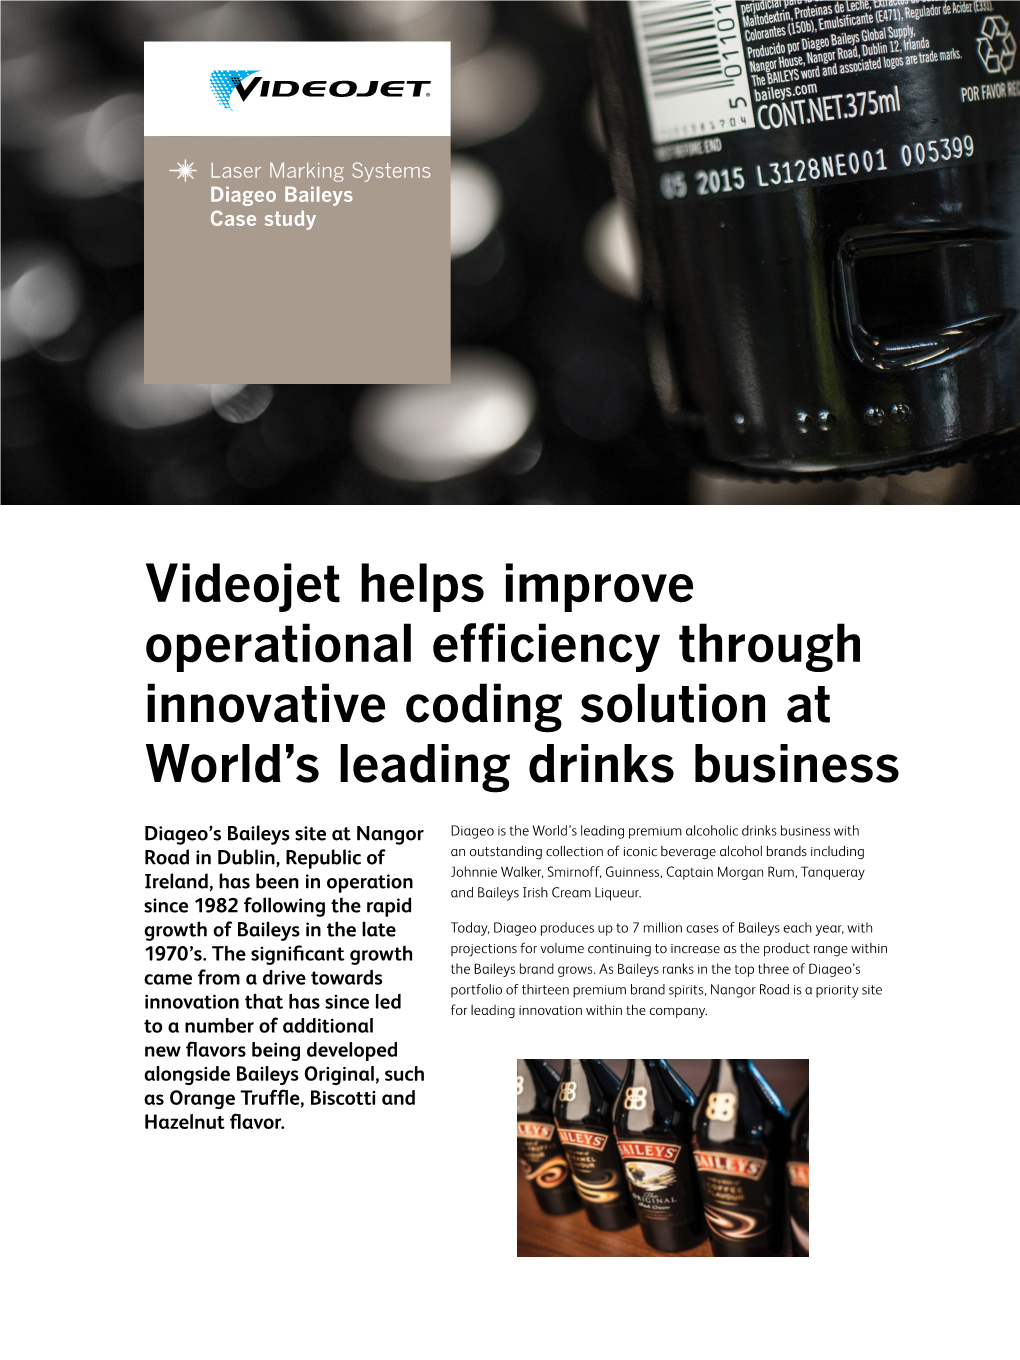 Videojet Helps Improve Operational Efficiency Through Innovative Coding Solution at World’S Leading Drinks Business